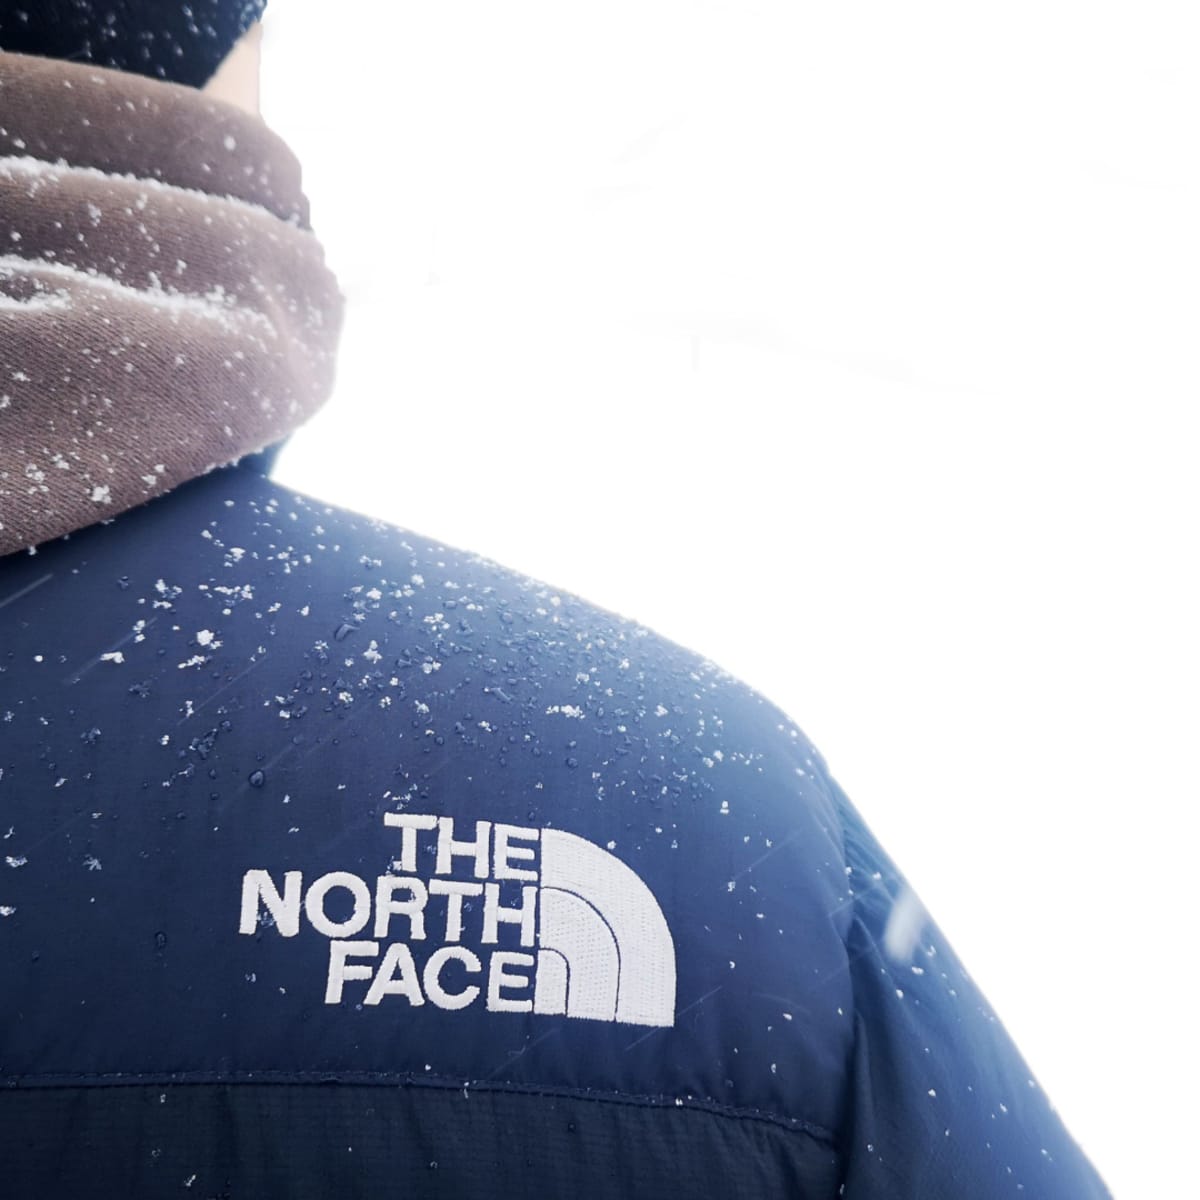 The North Face rearranges its team in Latin America: new CEO for